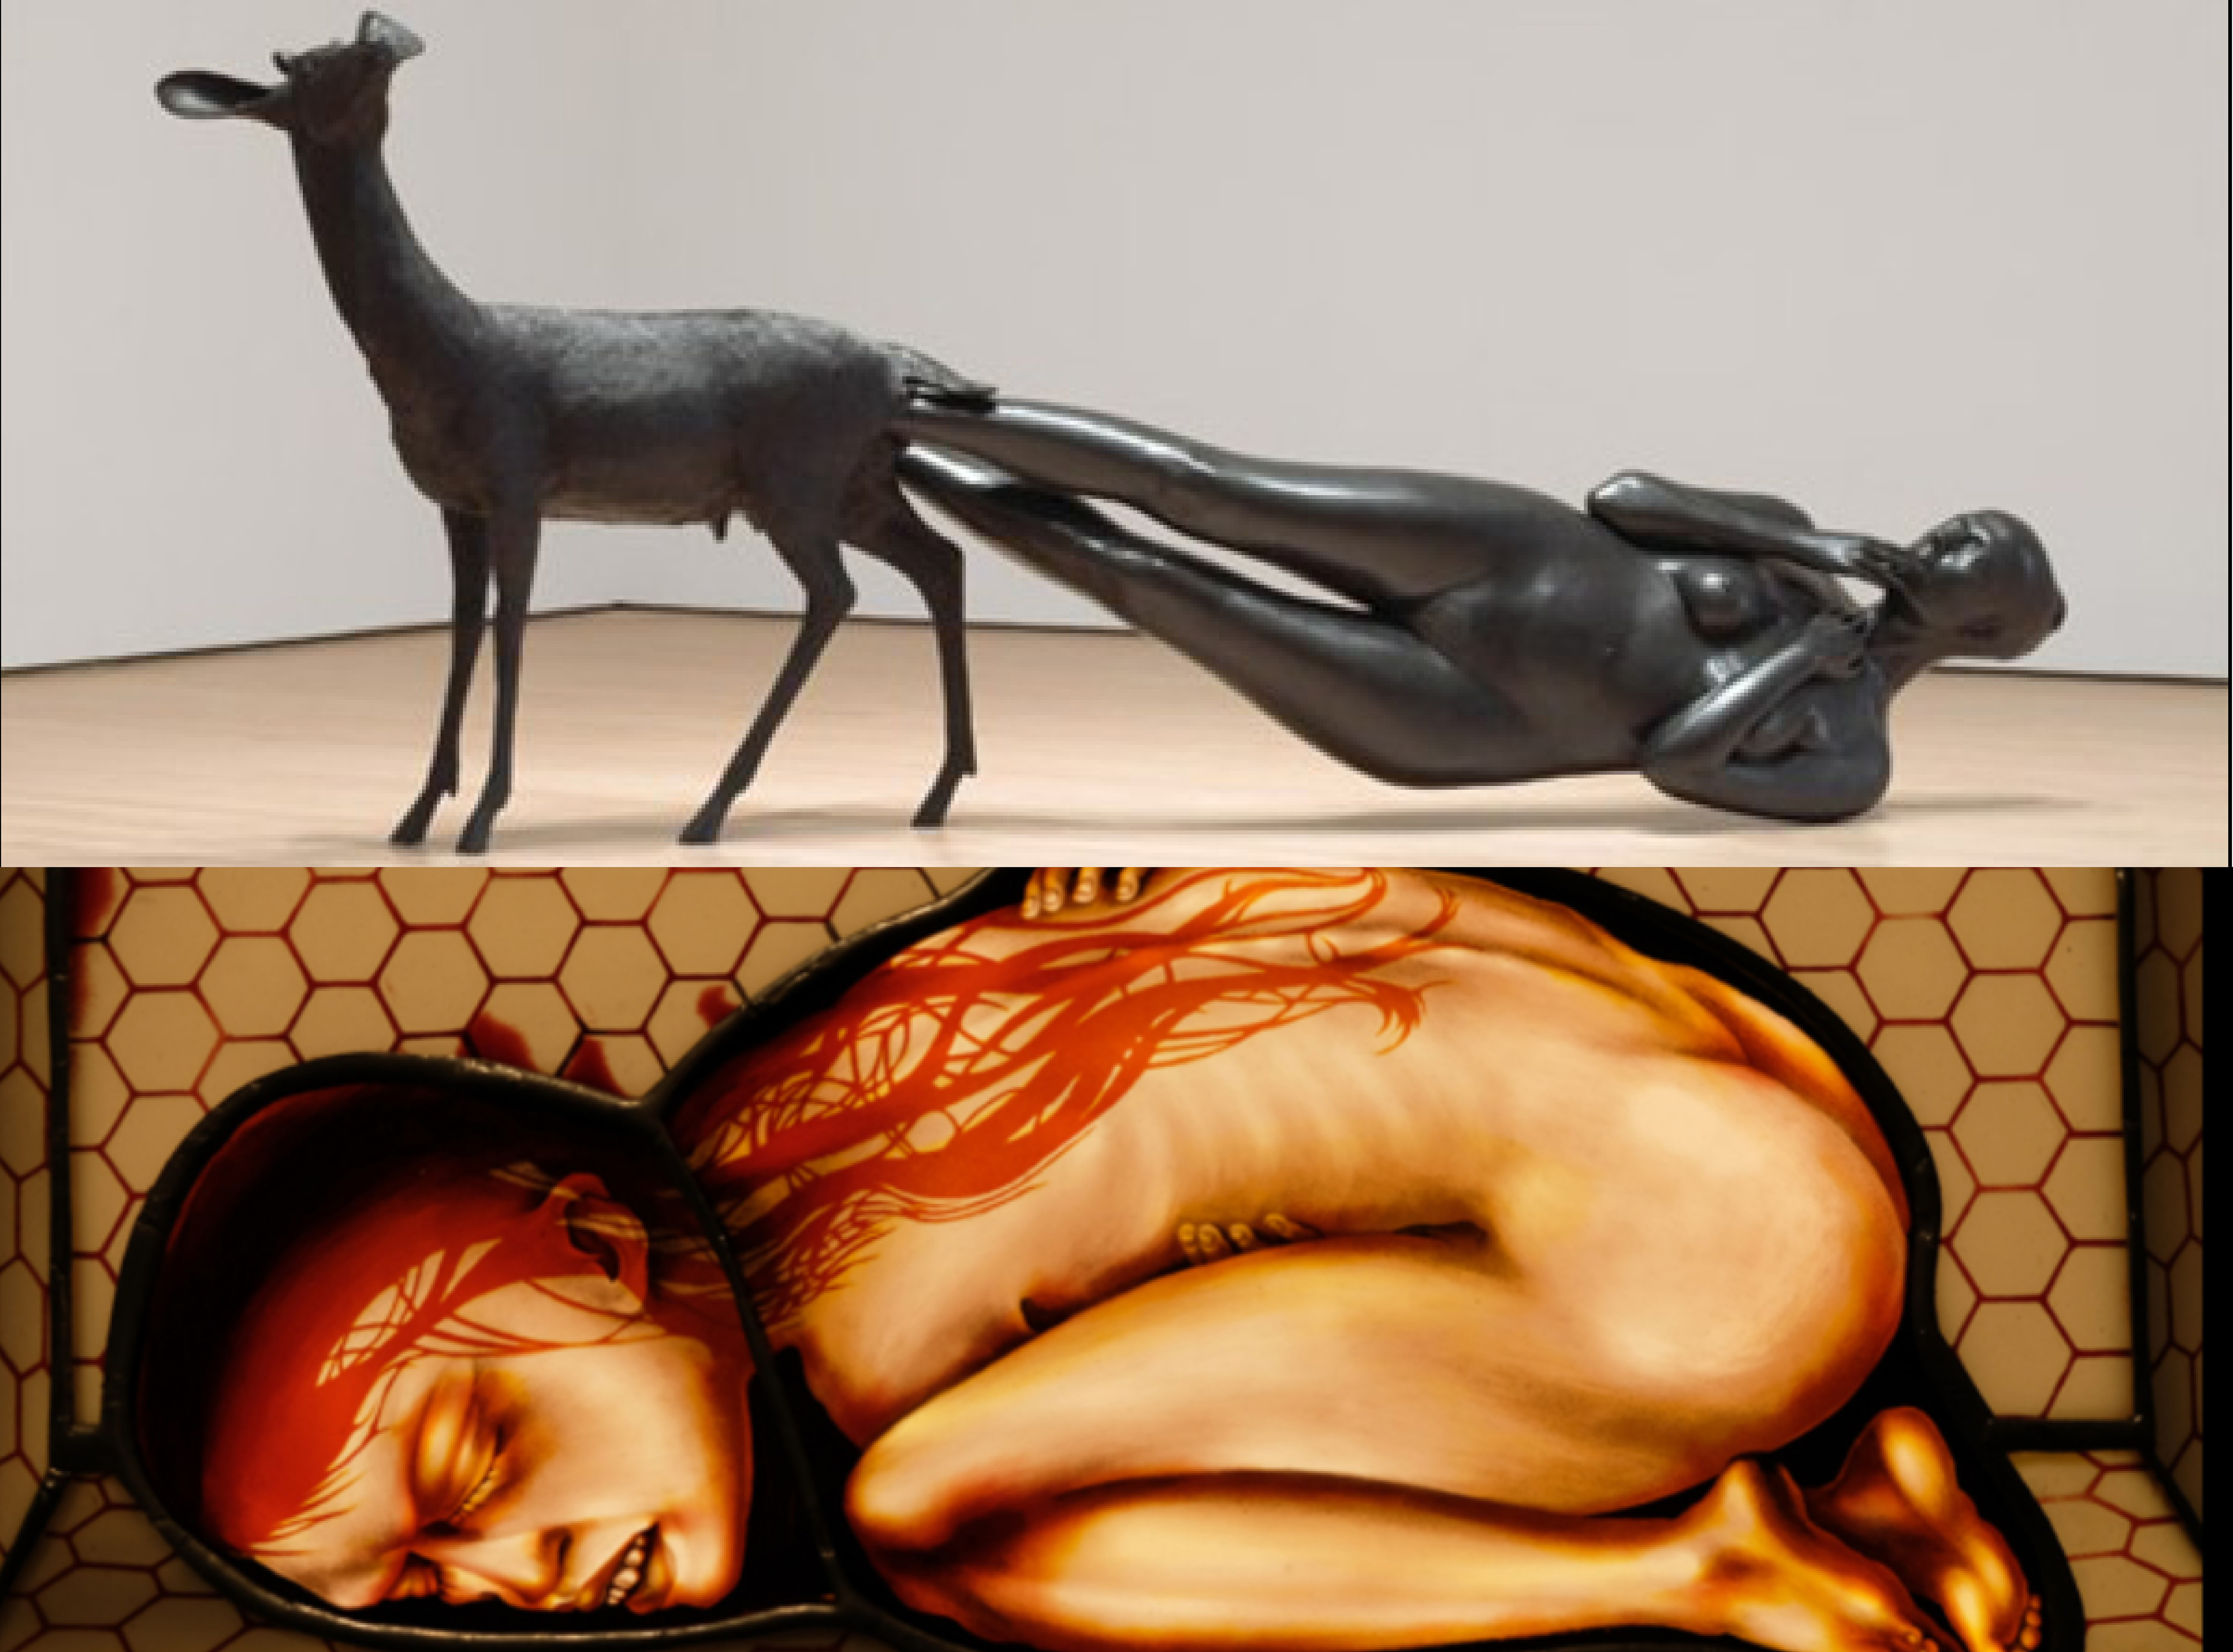 Two pieces of artwork - one is scuplture of a boyd being born from a deer and the other is a painting or print of a body (maybe a newborn) in foetle position.